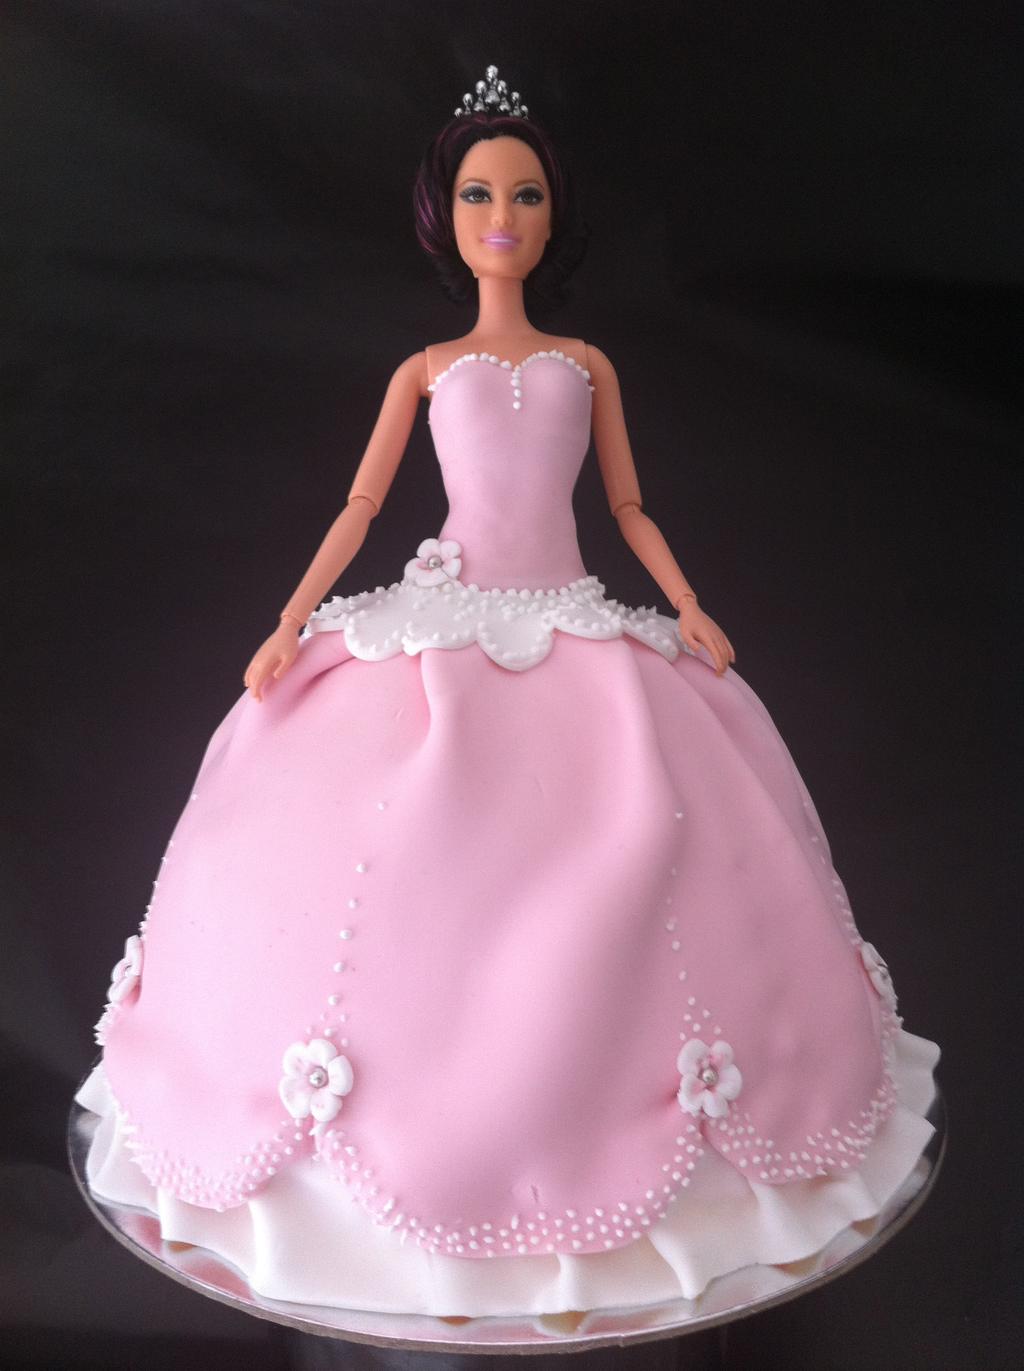 5.1: Making a princess cake (bake) In this task you will take a deeper look into how to make a